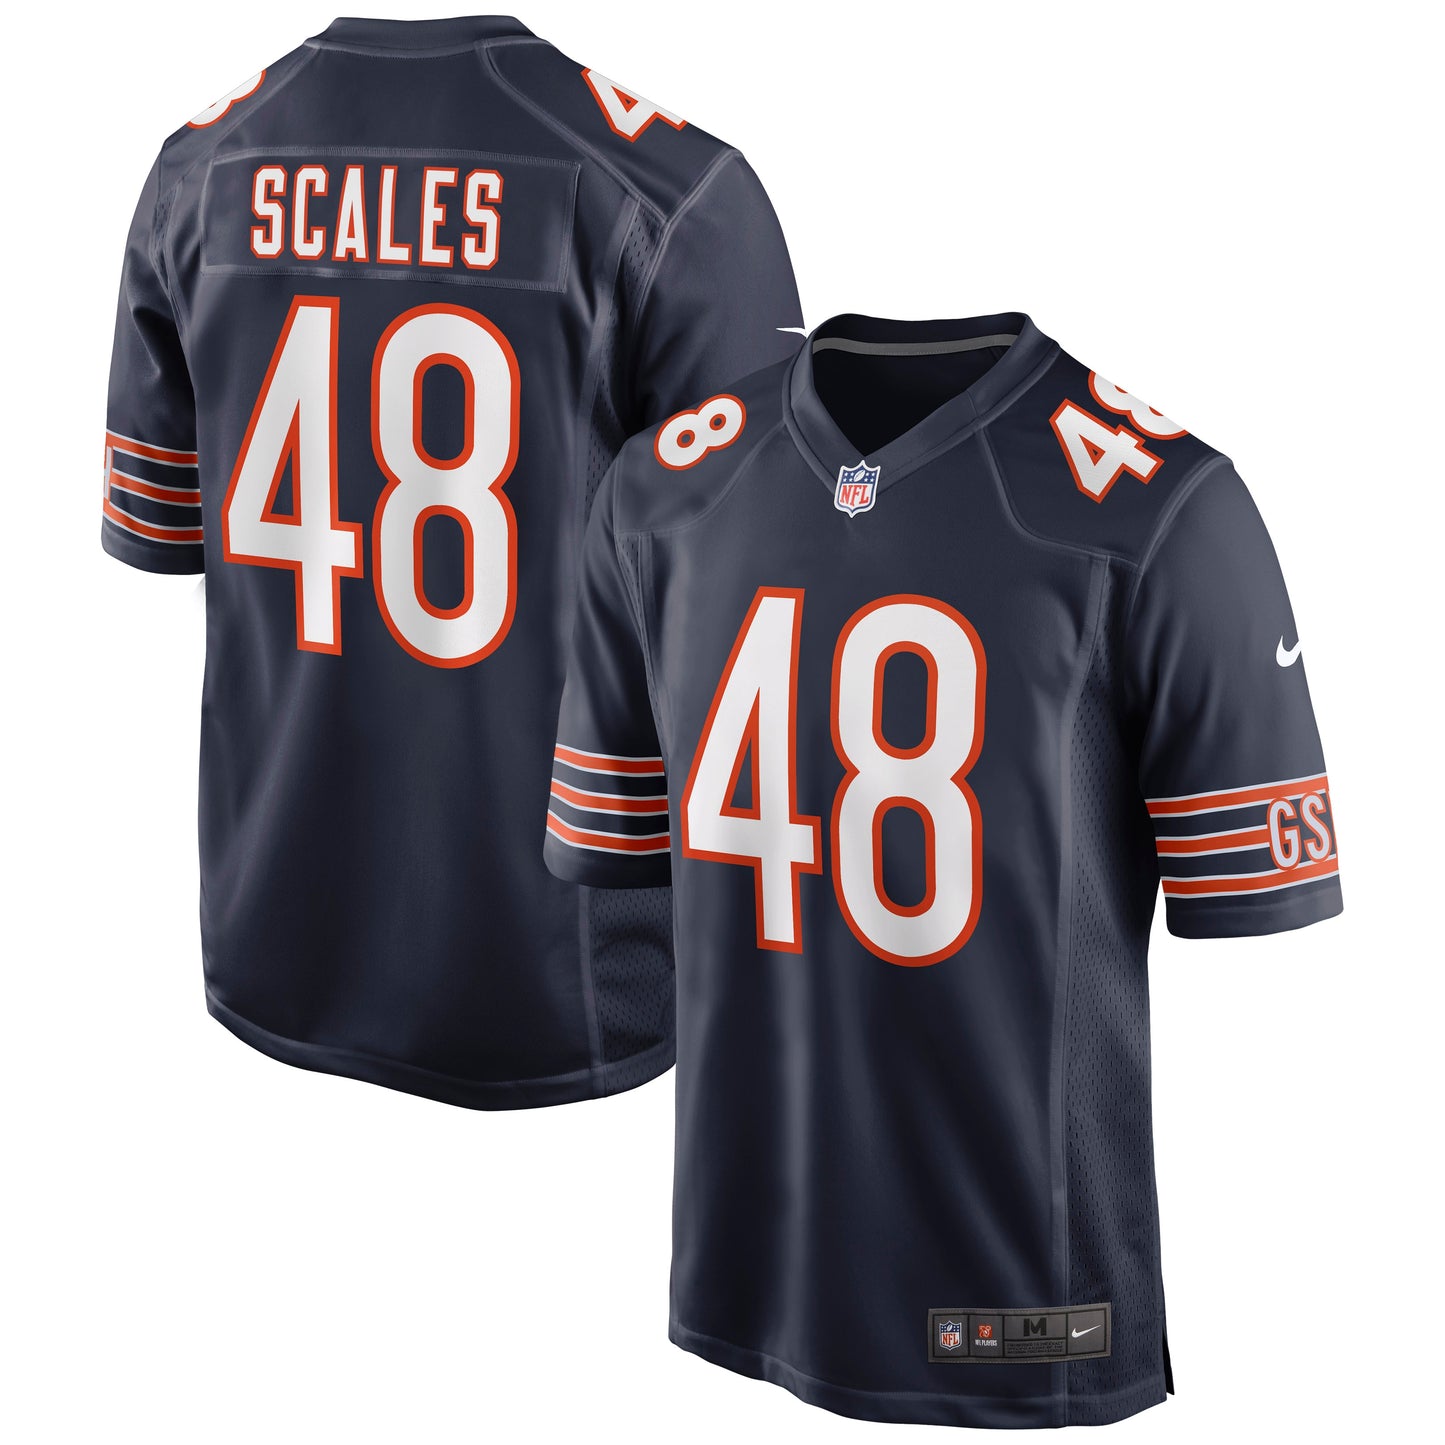 Patrick Scales Chicago Bears Nike Game Jersey - Navy